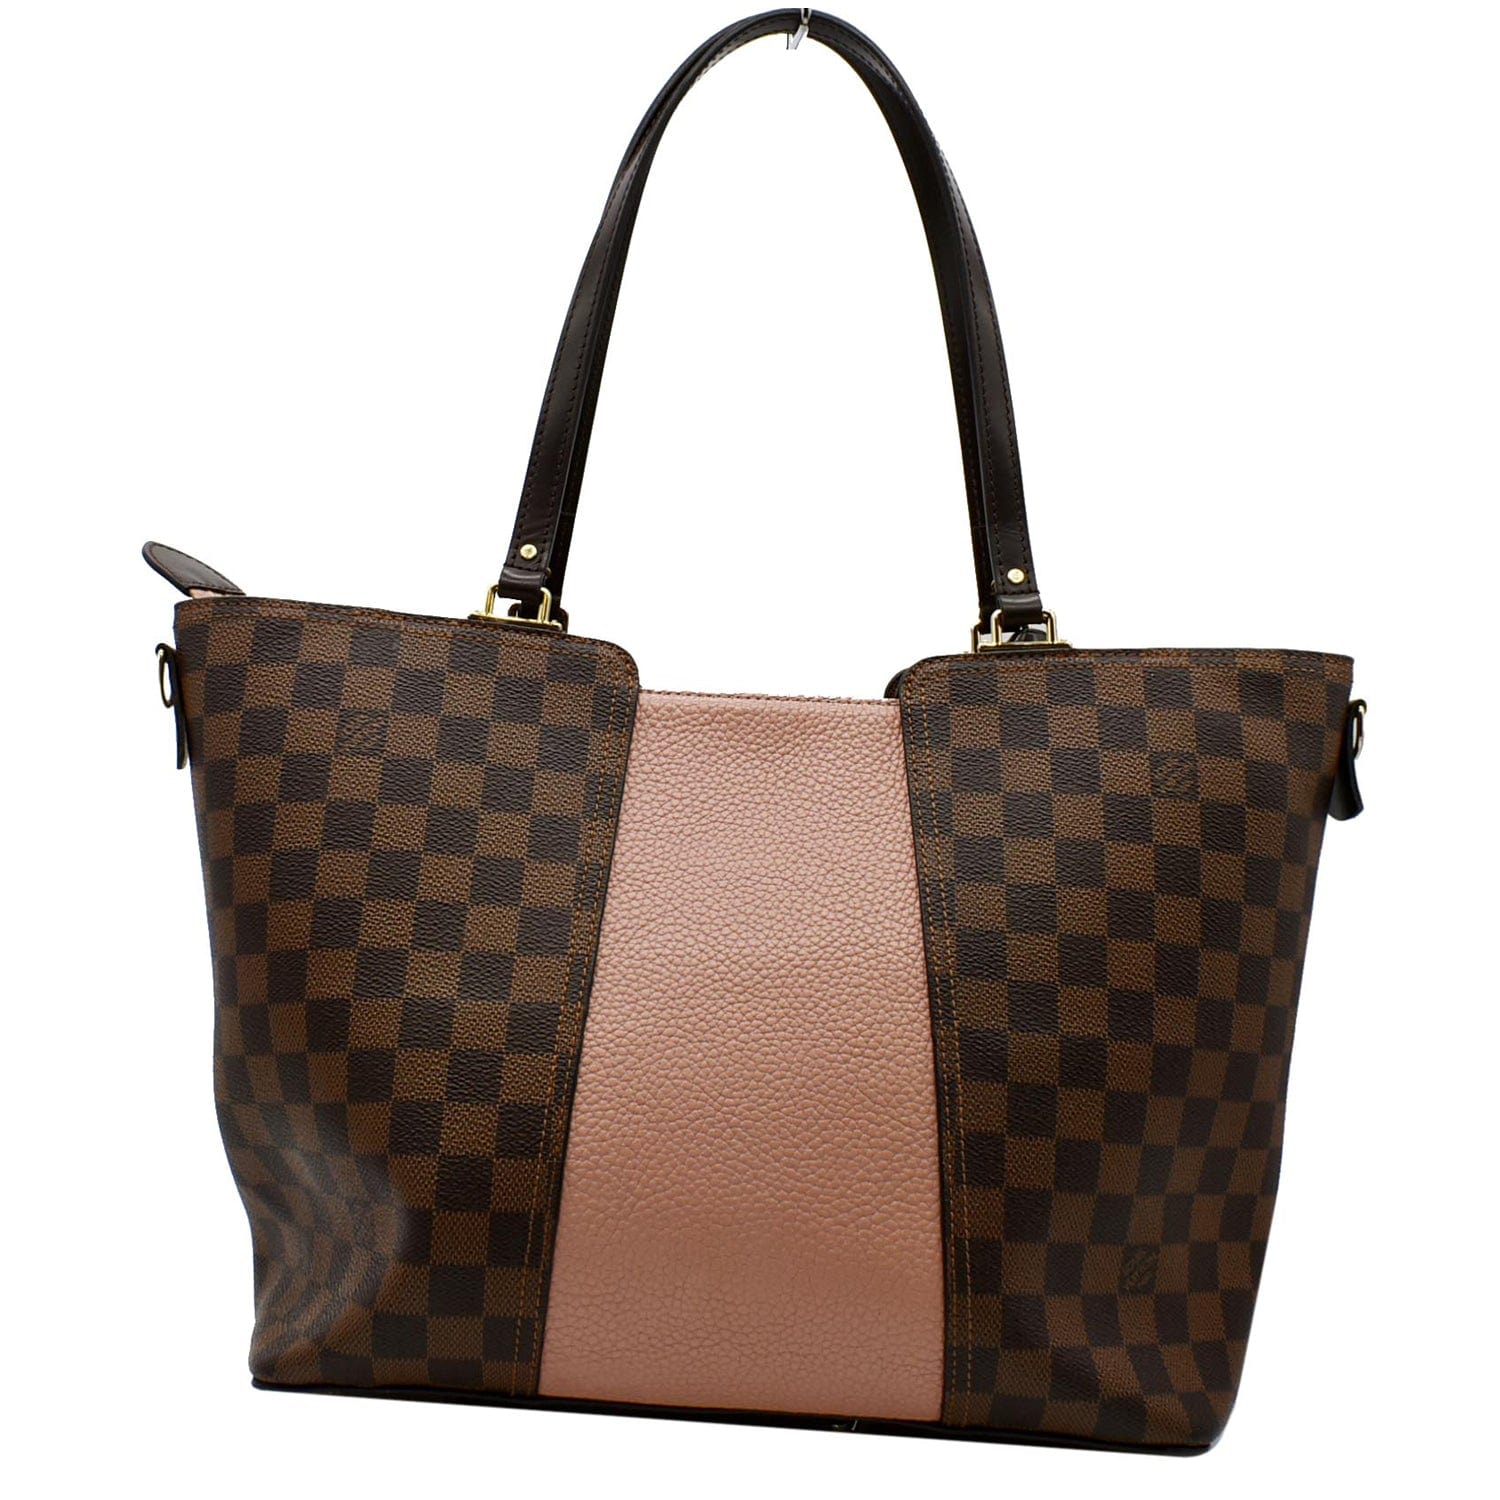 USED Louis Vuitton Damier Ebene with Pink Leather Jersey Tote Bag